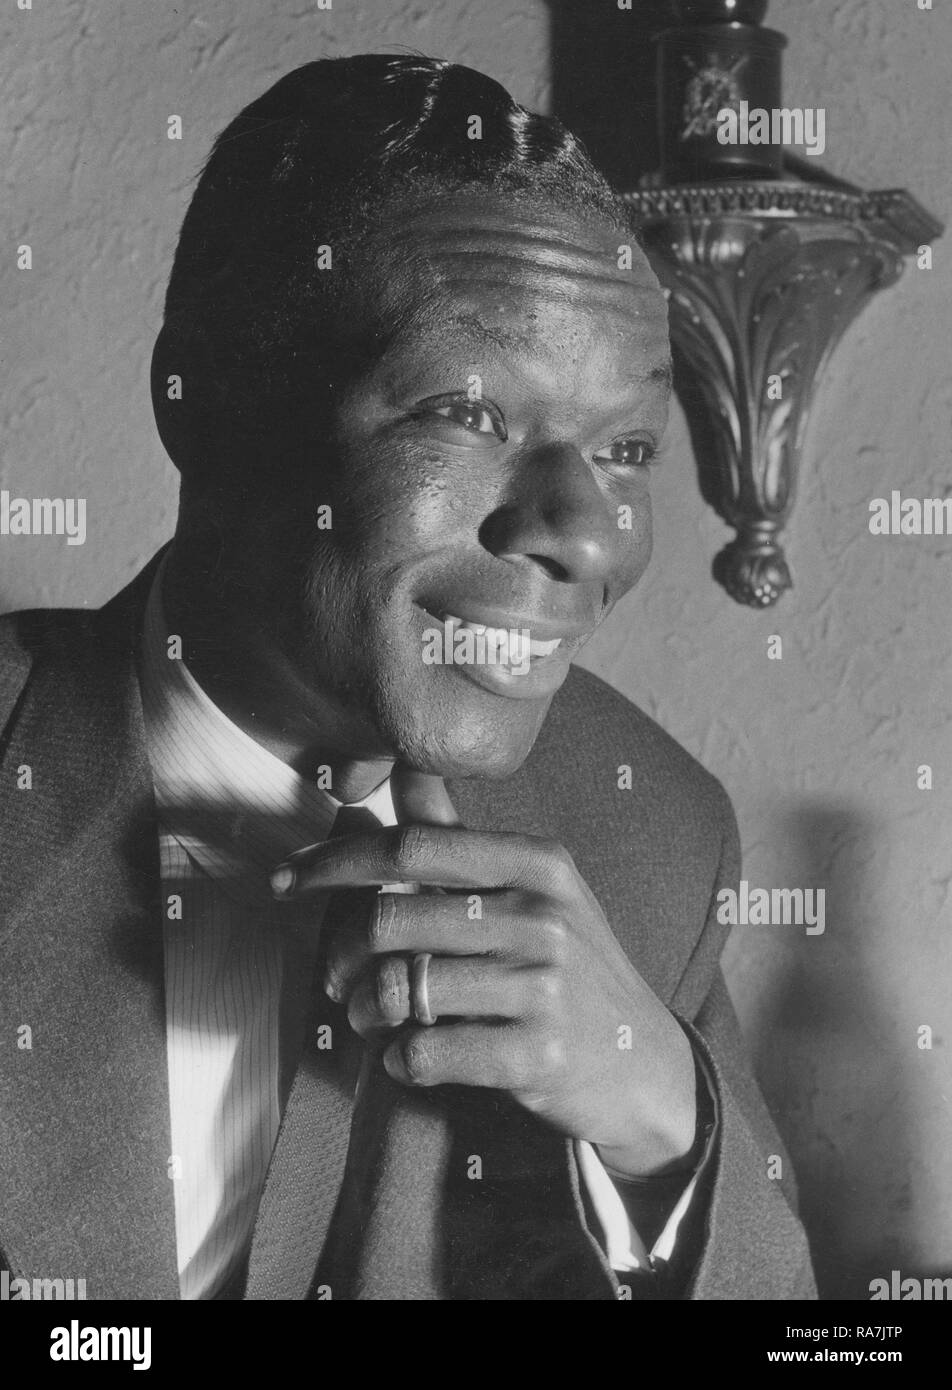 Nat King Cole. March 17, 1919 - Febryary 15, 1965. American jazz pianist and singer. Pictured here during a visit to Stockholm Sweden 1954 when performing there. Photo Kristoffersson. Stock Photo